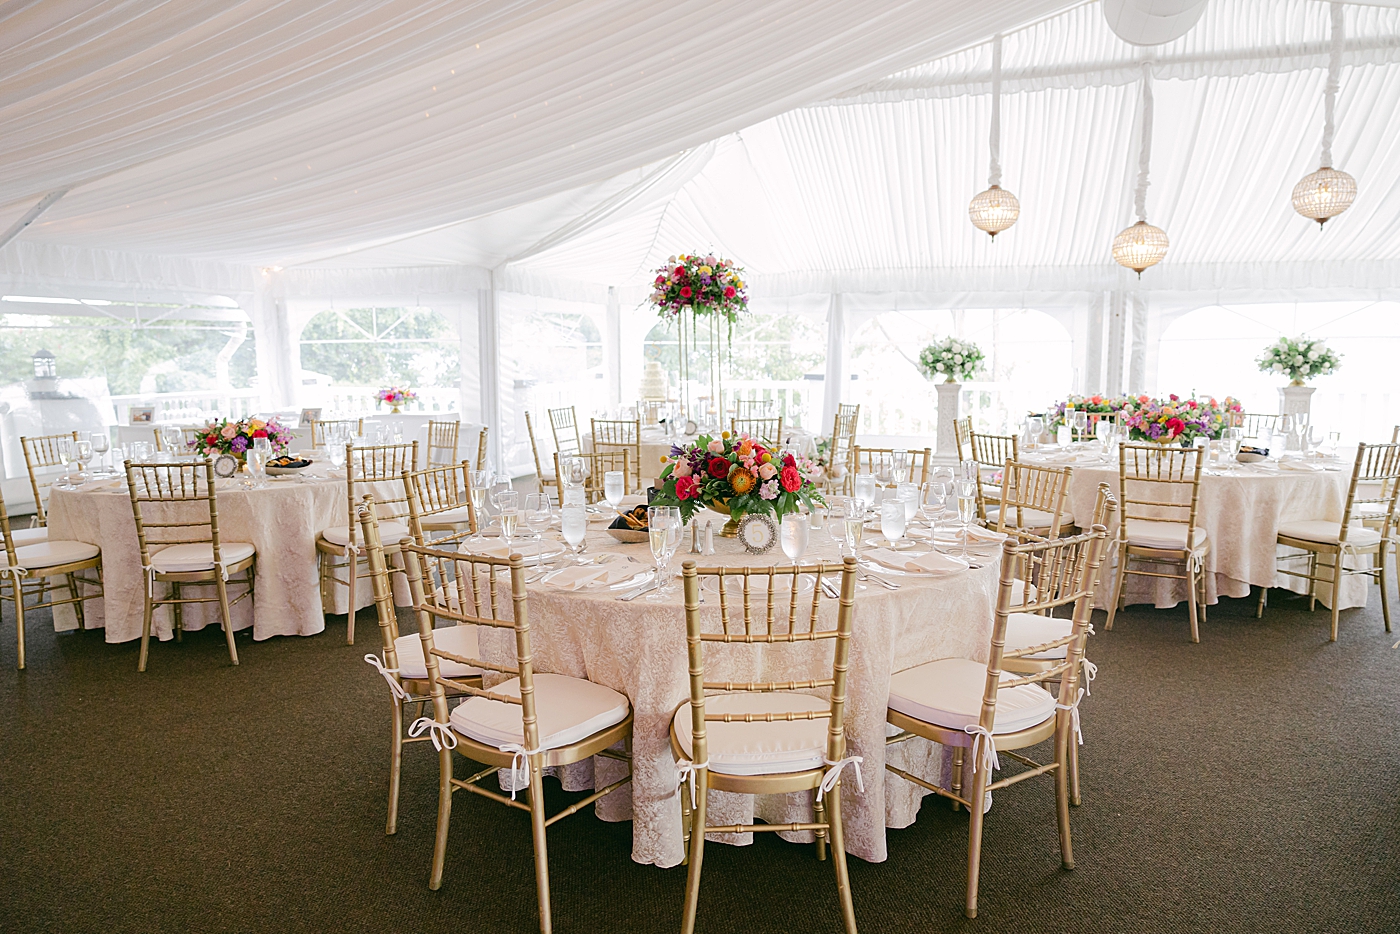 Reception table details during Sagamore Wedding | Image by Hope Helmuth Photography